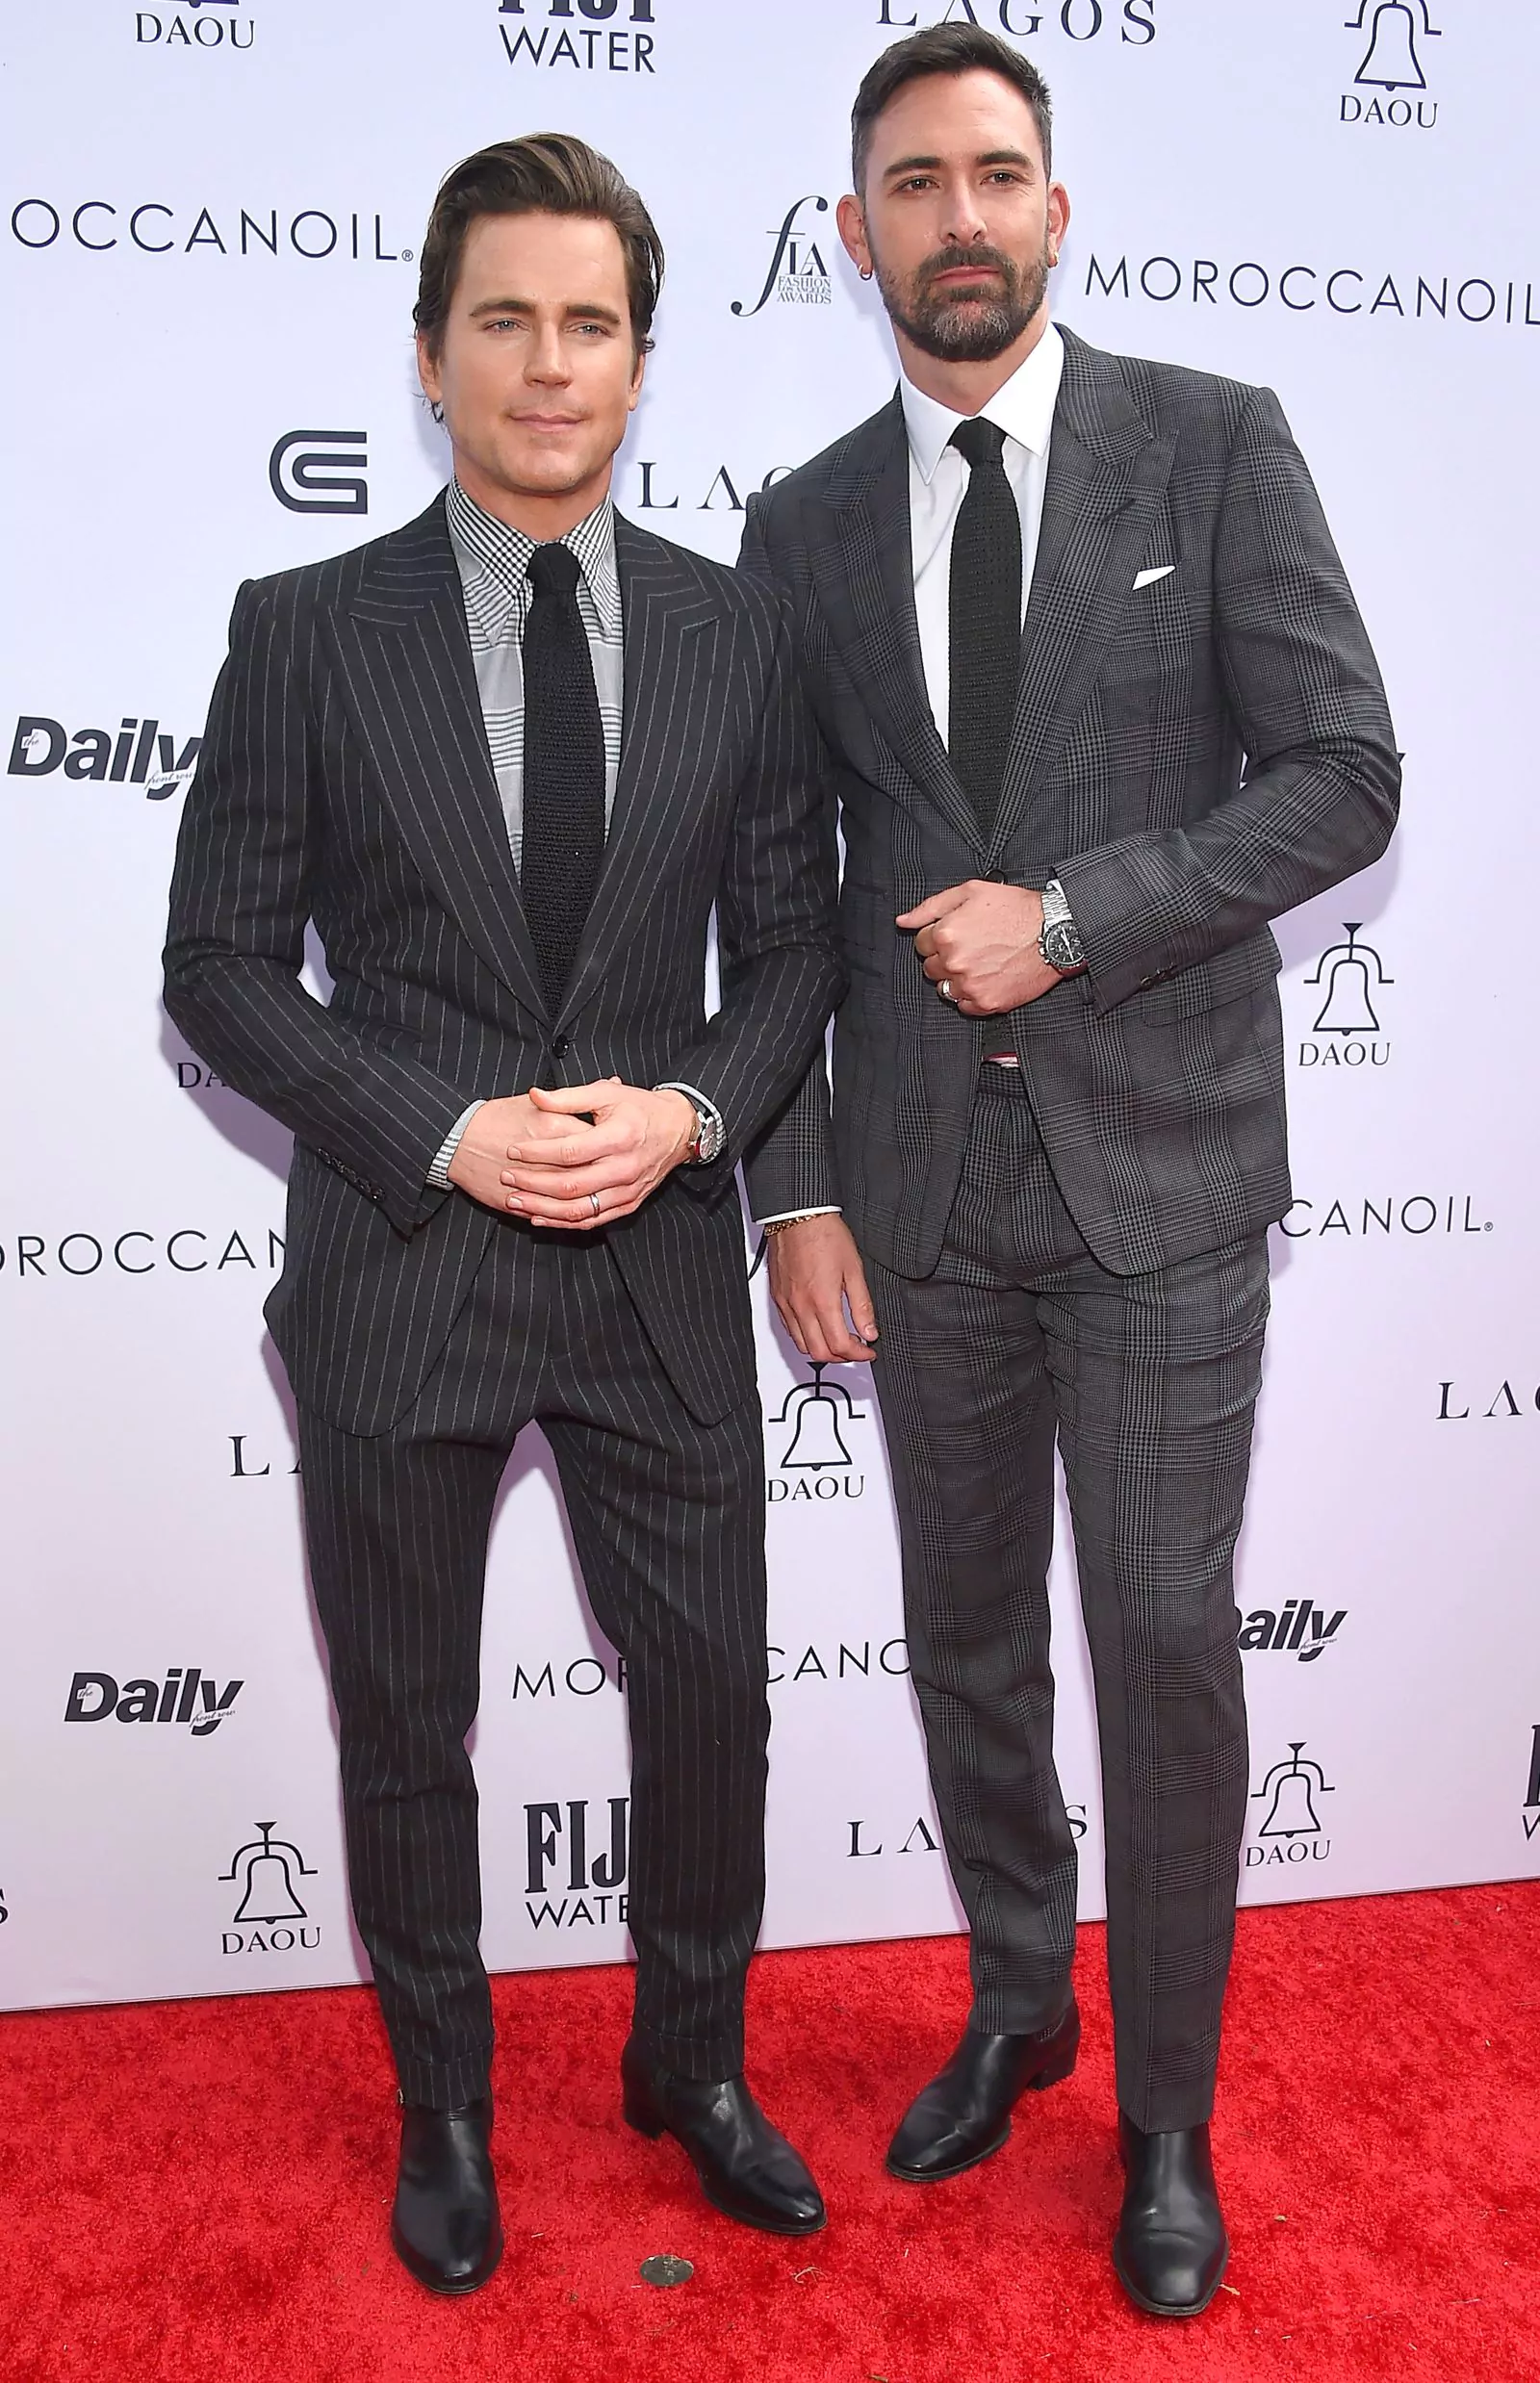 Matt Bomer and Warren Alfie Baker attend The Daily's Fashion LA Awards 2023 in Beverly Hills on April 23, 2023.